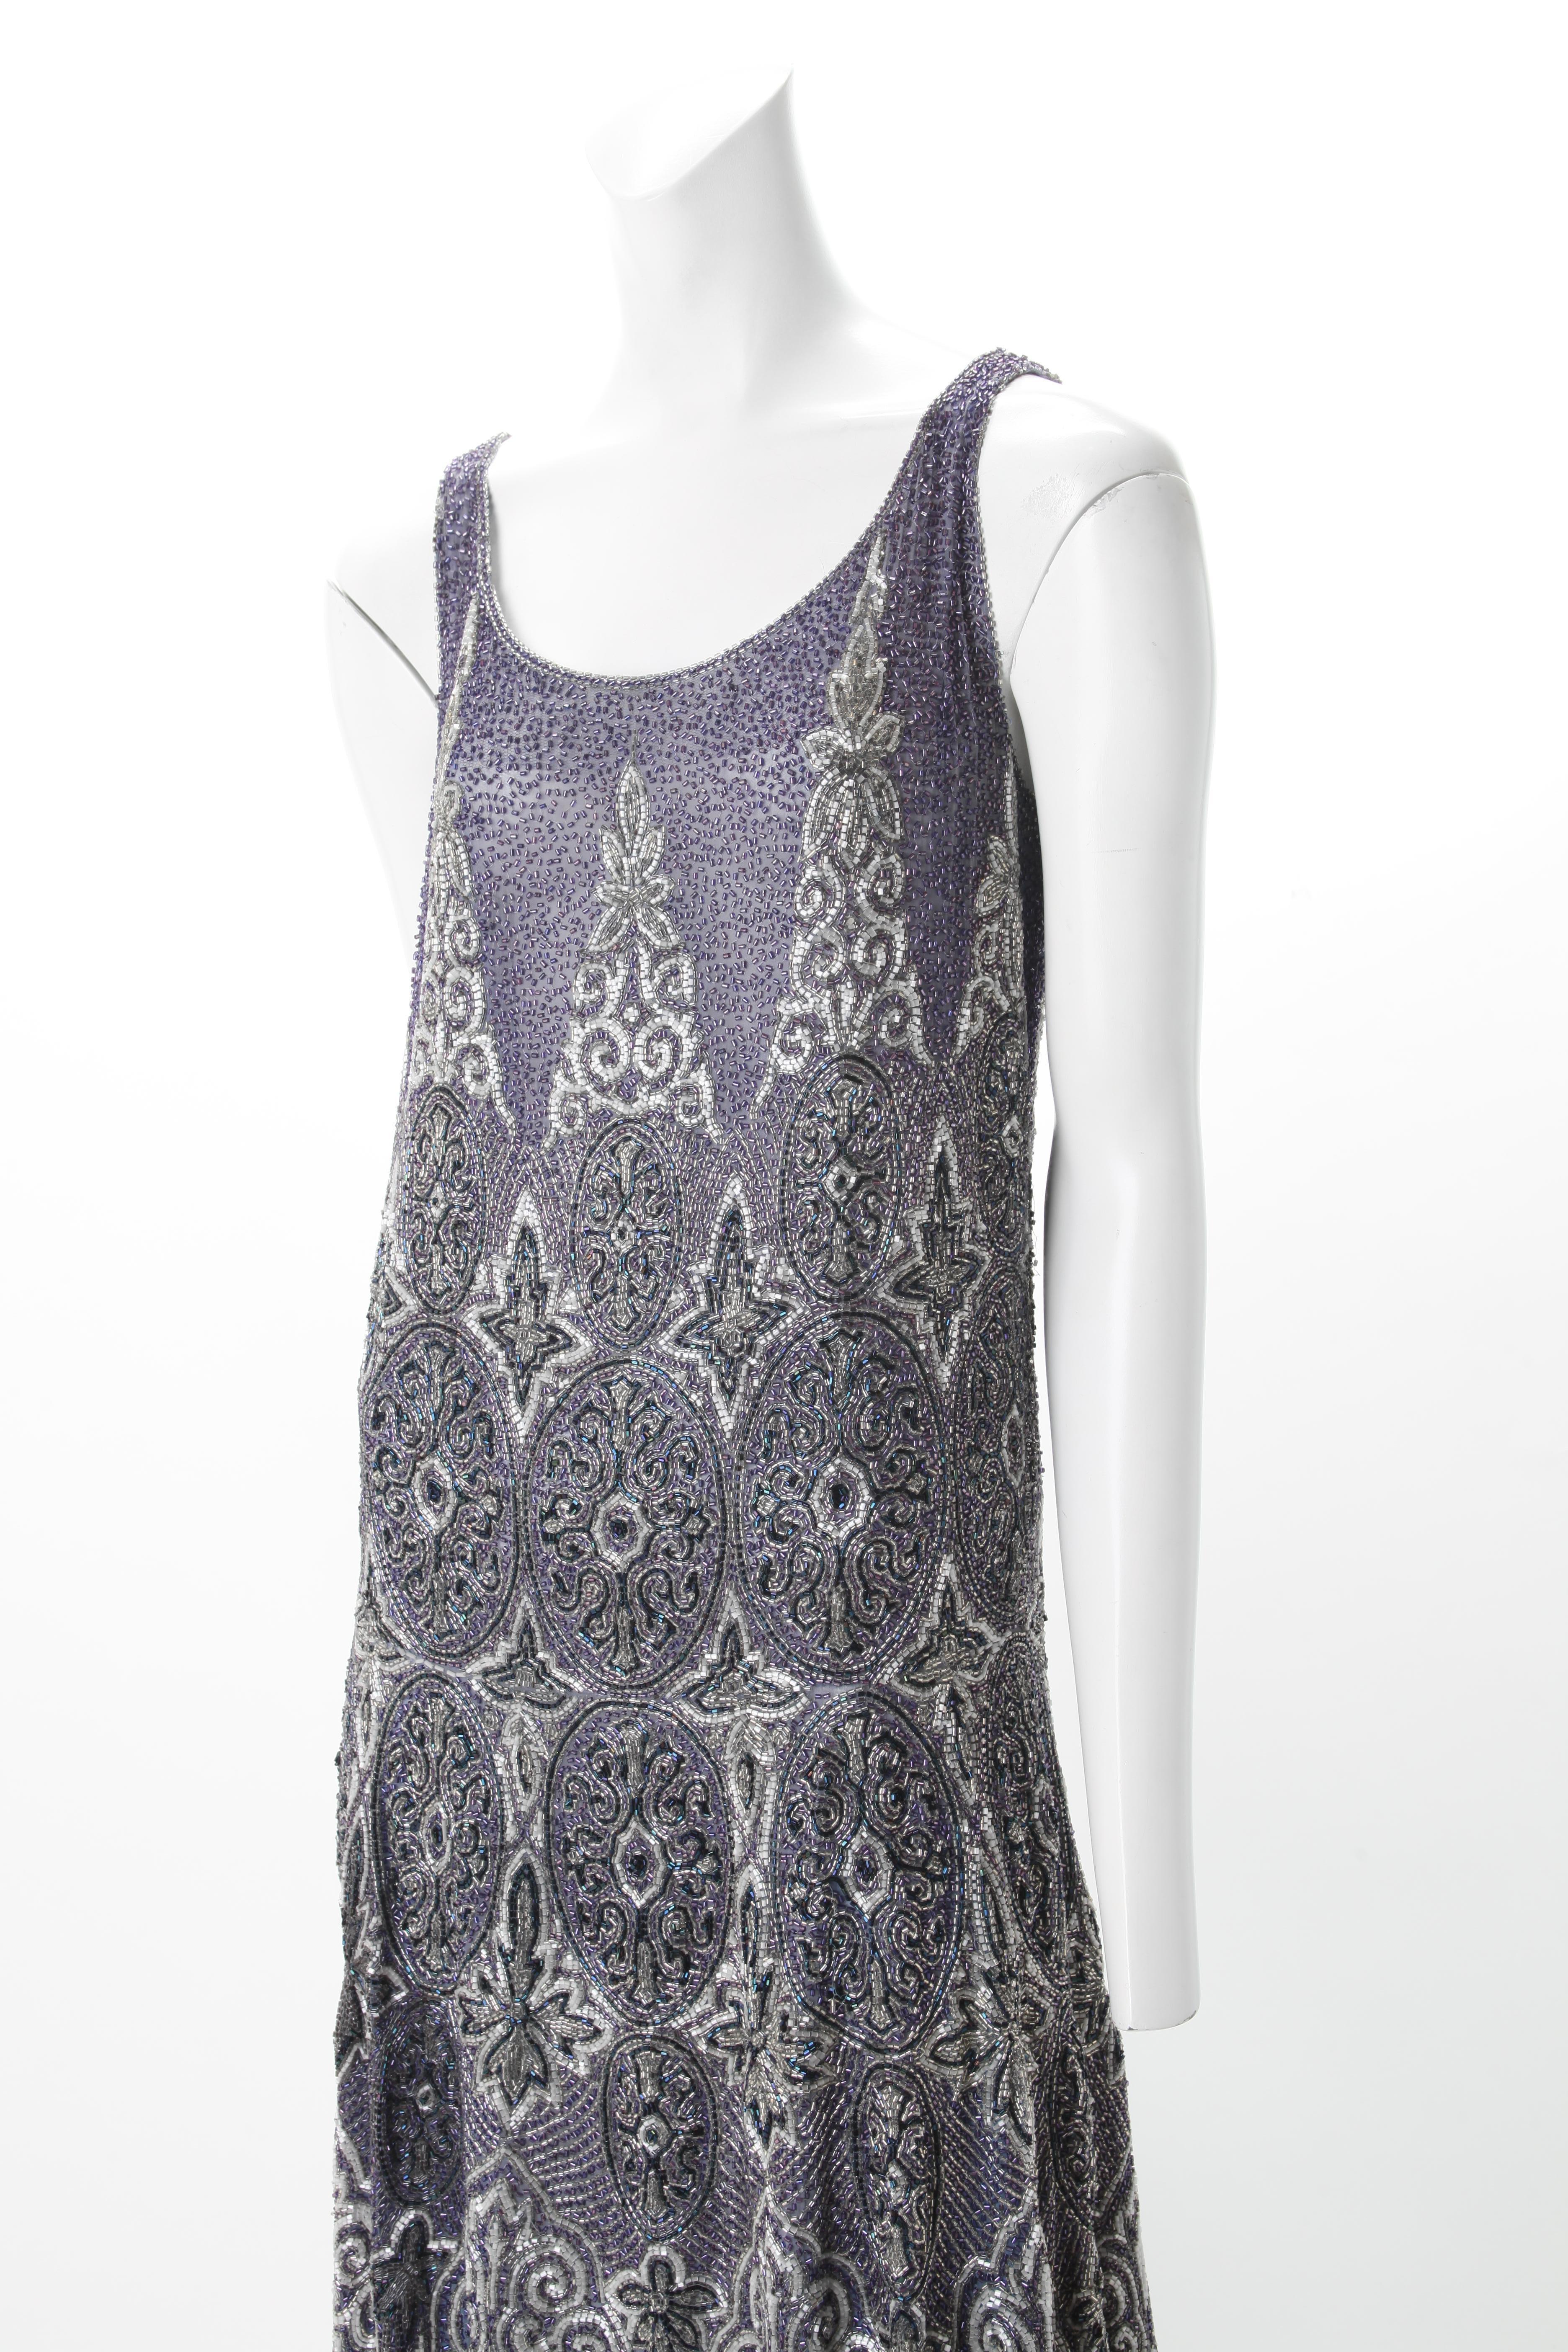 Elaborately Beaded French FLapper Dress, c.1920s
Indigo knee-length gauze Flapper dress with intricate beading of art deco style motifs in shades of indigo, blue and silver. Featuring the traditional scoop neckline and drop-waist design detail of